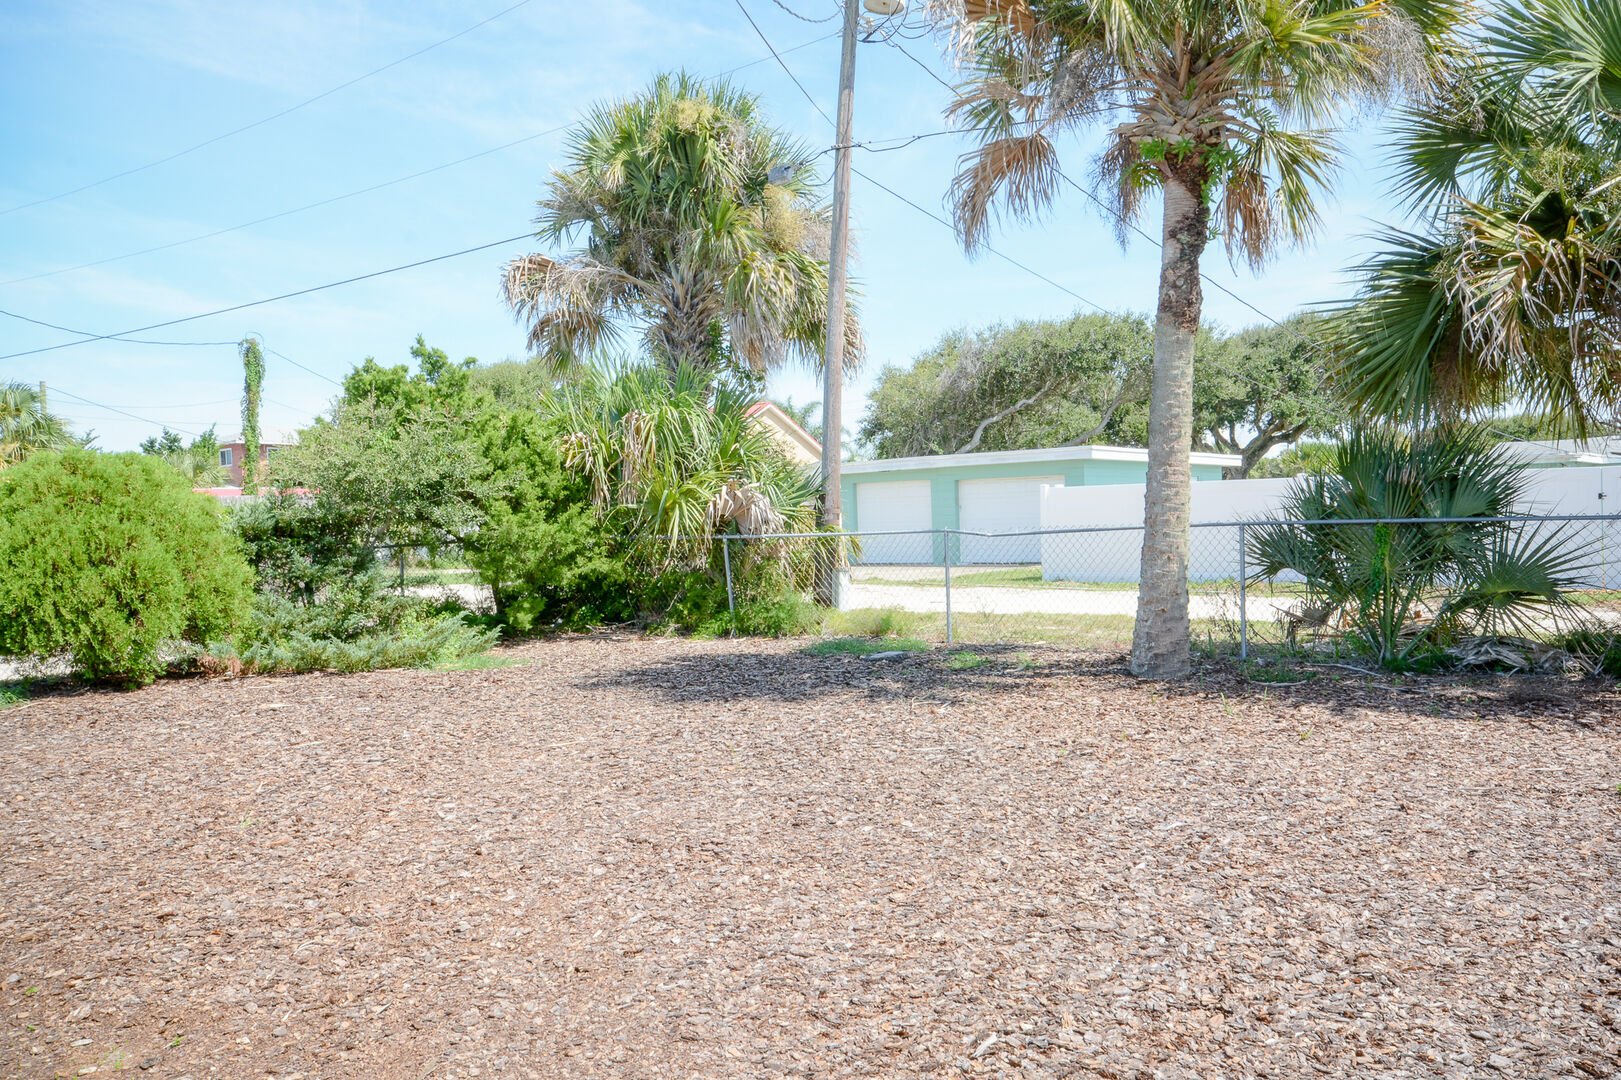 Fenced in Yard and Palm Trees at Vacation Home New Smyrna Beach